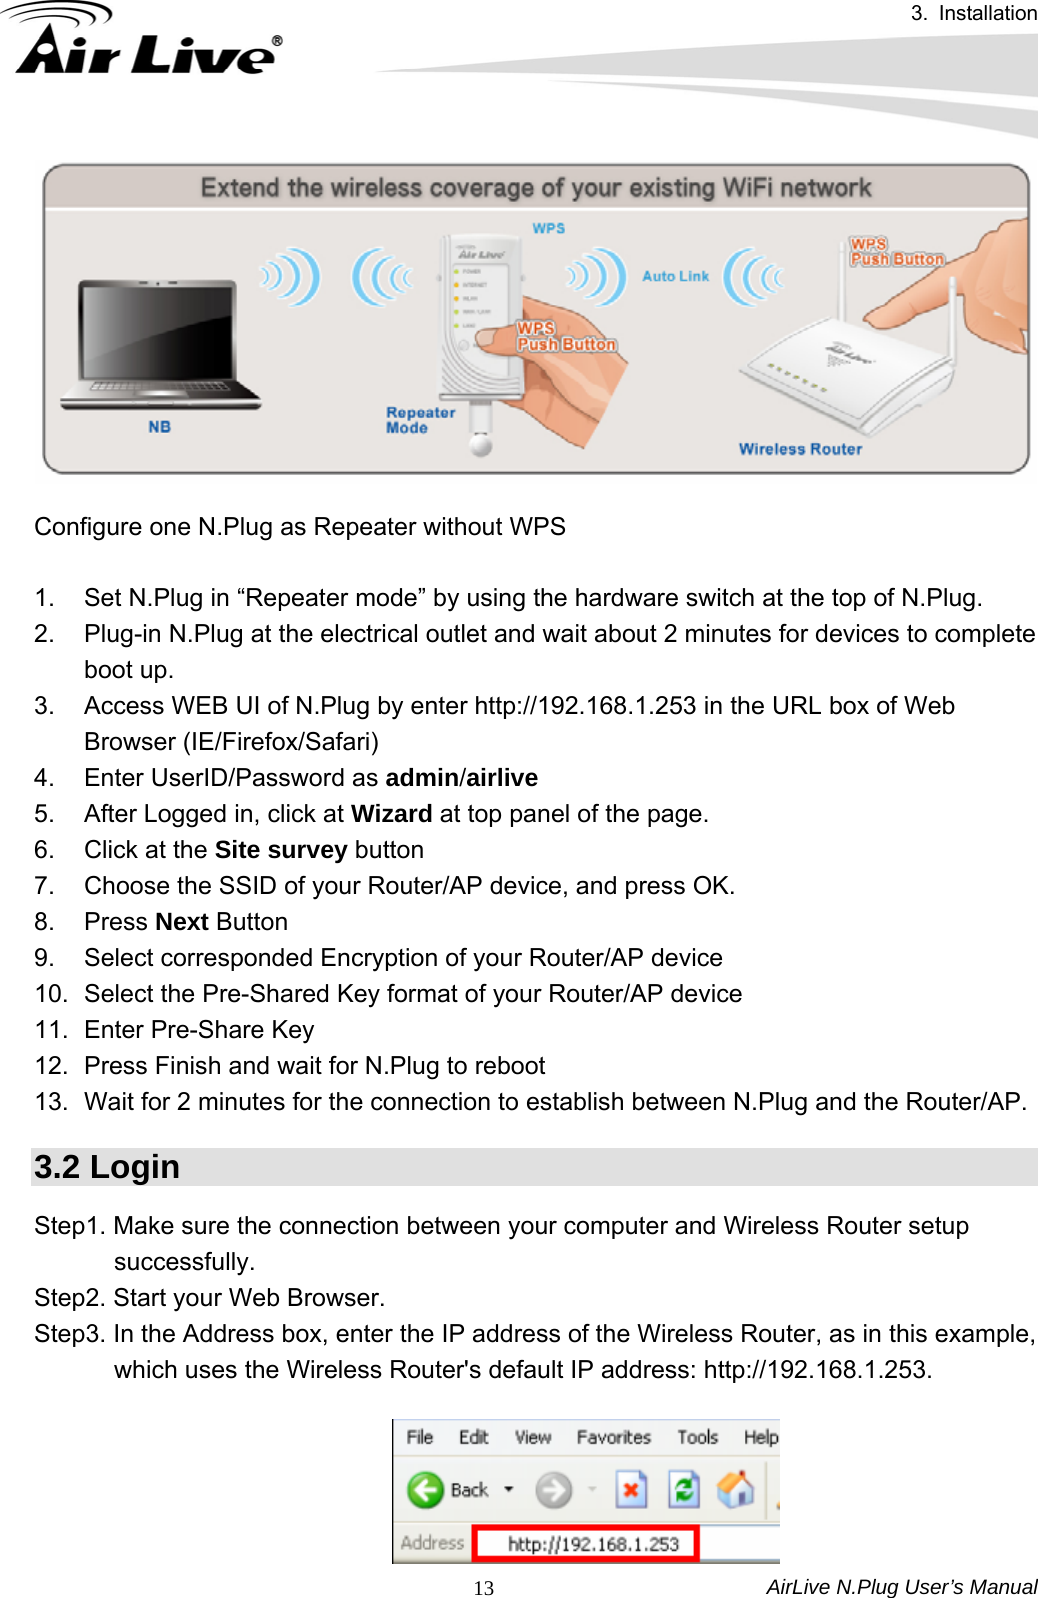 3. Installation AirLive N.Plug User’s Manual  13  Configure one N.Plug as Repeater without WPS    1.  Set N.Plug in “Repeater mode” by using the hardware switch at the top of N.Plug. 2.  Plug-in N.Plug at the electrical outlet and wait about 2 minutes for devices to complete boot up. 3.  Access WEB UI of N.Plug by enter http://192.168.1.253 in the URL box of Web Browser (IE/Firefox/Safari) 4.  Enter UserID/Password as admin/airlive 5.  After Logged in, click at Wizard at top panel of the page. 6.  Click at the Site survey button 7.  Choose the SSID of your Router/AP device, and press OK. 8. Press Next Button 9.  Select corresponded Encryption of your Router/AP device 10.  Select the Pre-Shared Key format of your Router/AP device 11.  Enter Pre-Share Key 12.  Press Finish and wait for N.Plug to reboot 13.  Wait for 2 minutes for the connection to establish between N.Plug and the Router/AP. 3.2 Login Step1. Make sure the connection between your computer and Wireless Router setup successfully. Step2. Start your Web Browser. Step3. In the Address box, enter the IP address of the Wireless Router, as in this example, which uses the Wireless Router&apos;s default IP address: http://192.168.1.253.   